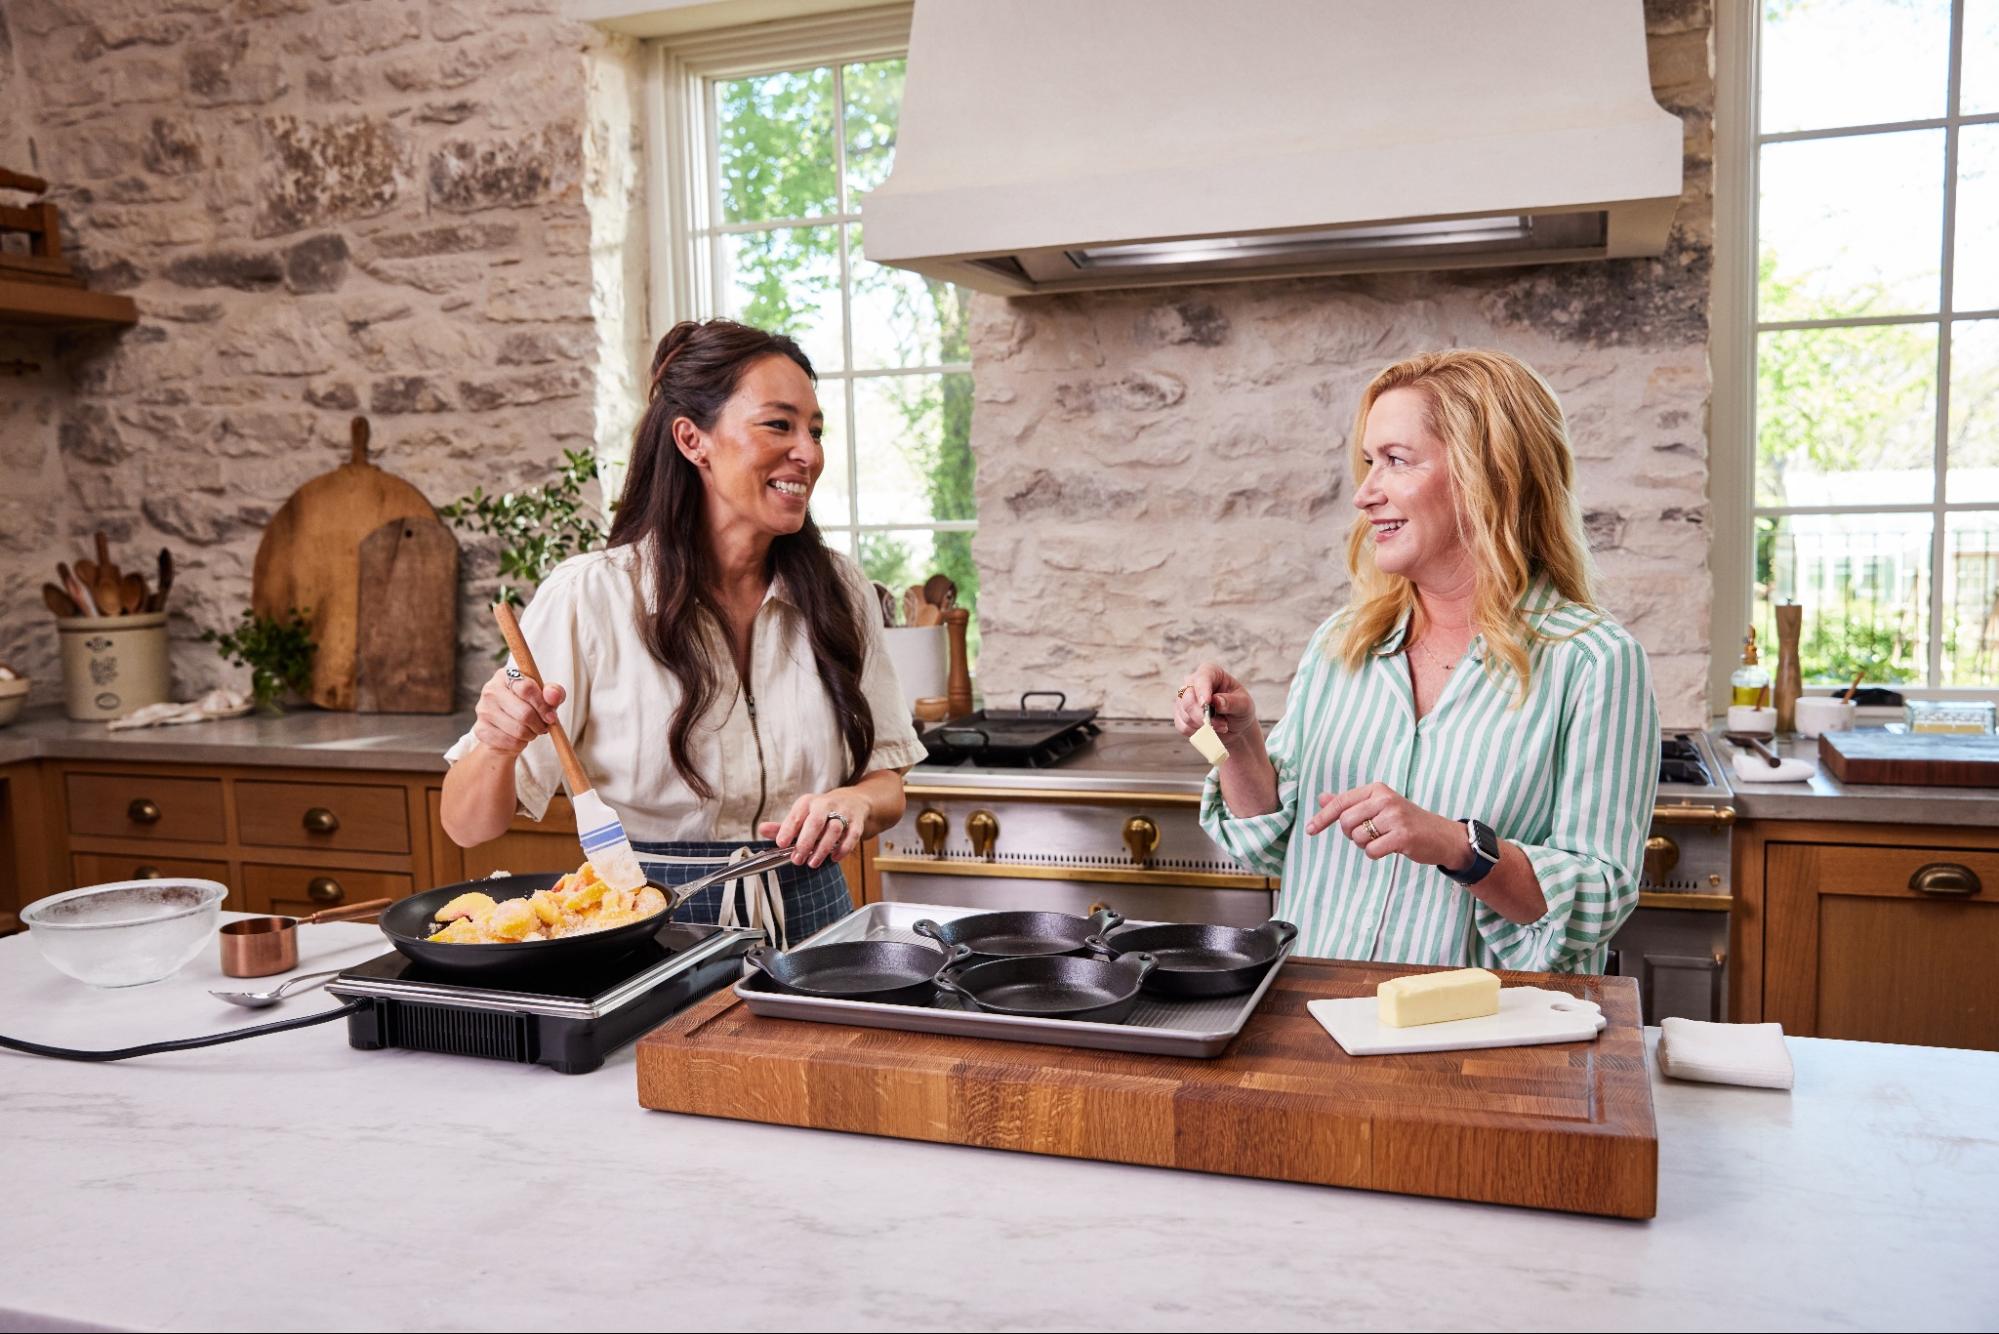 Joanna Gaines and Angela Kinsey chat in the kitchen as they make tried-and-true Texas recipes.